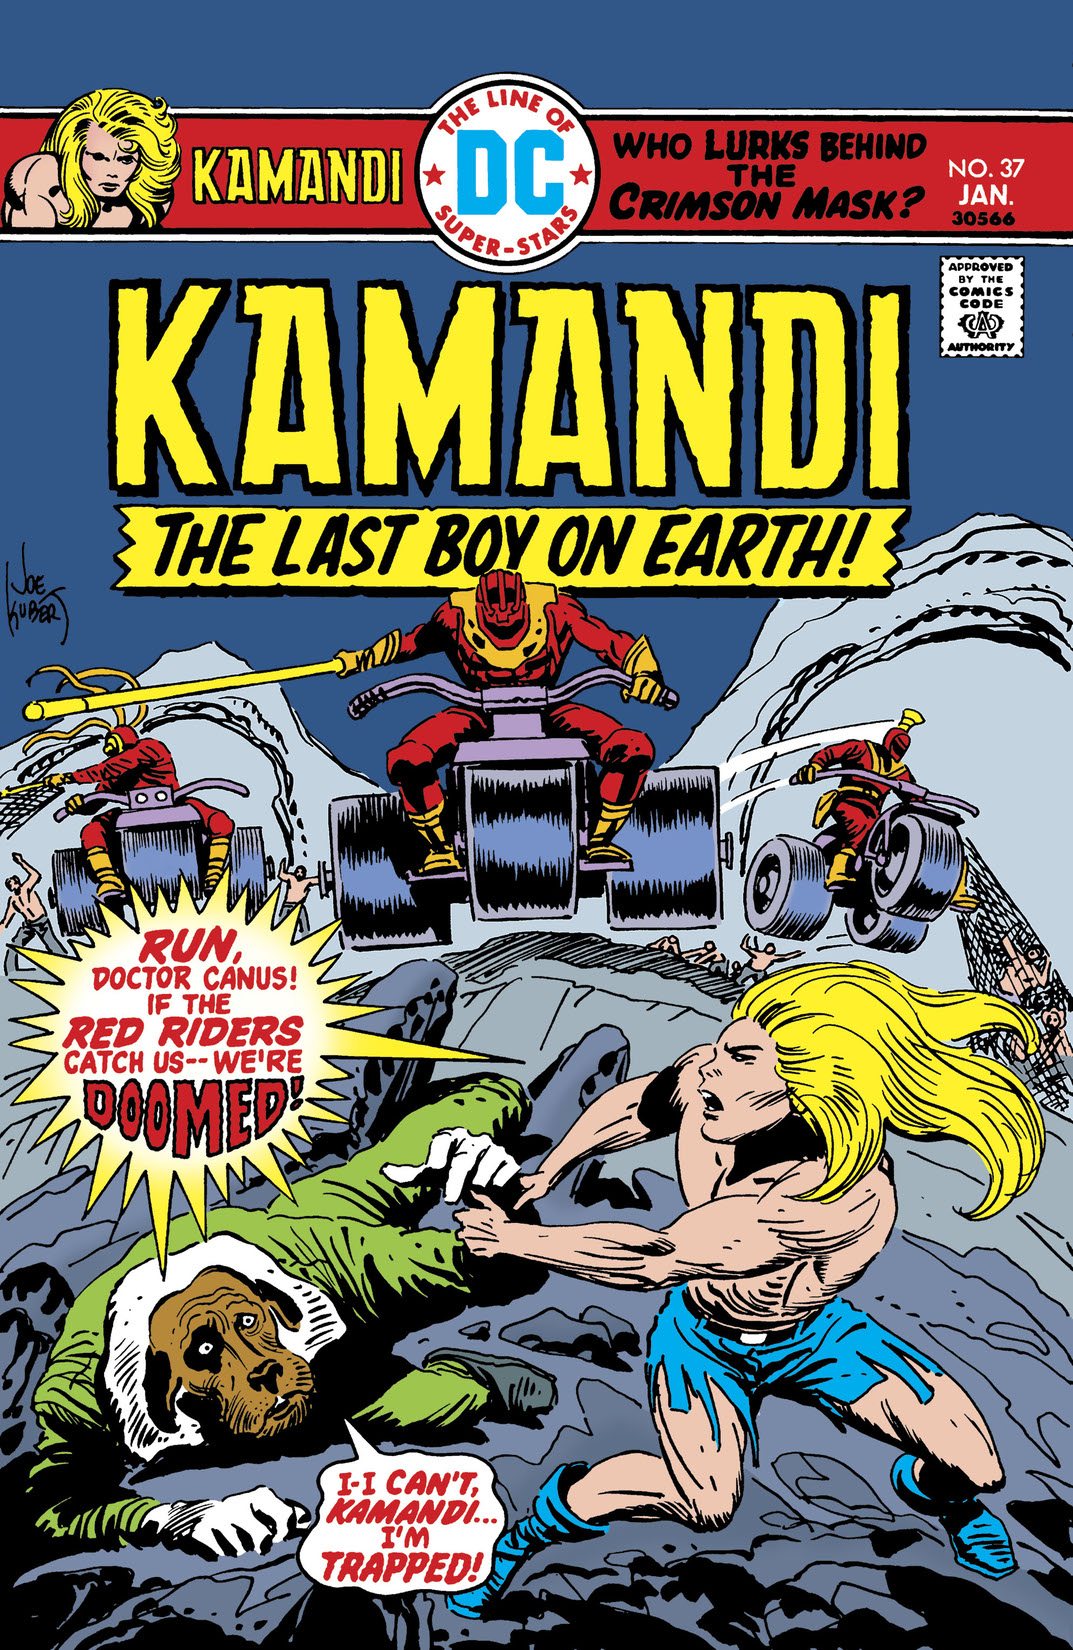 Kamandi: The Last Boy on Earth #37 preview images